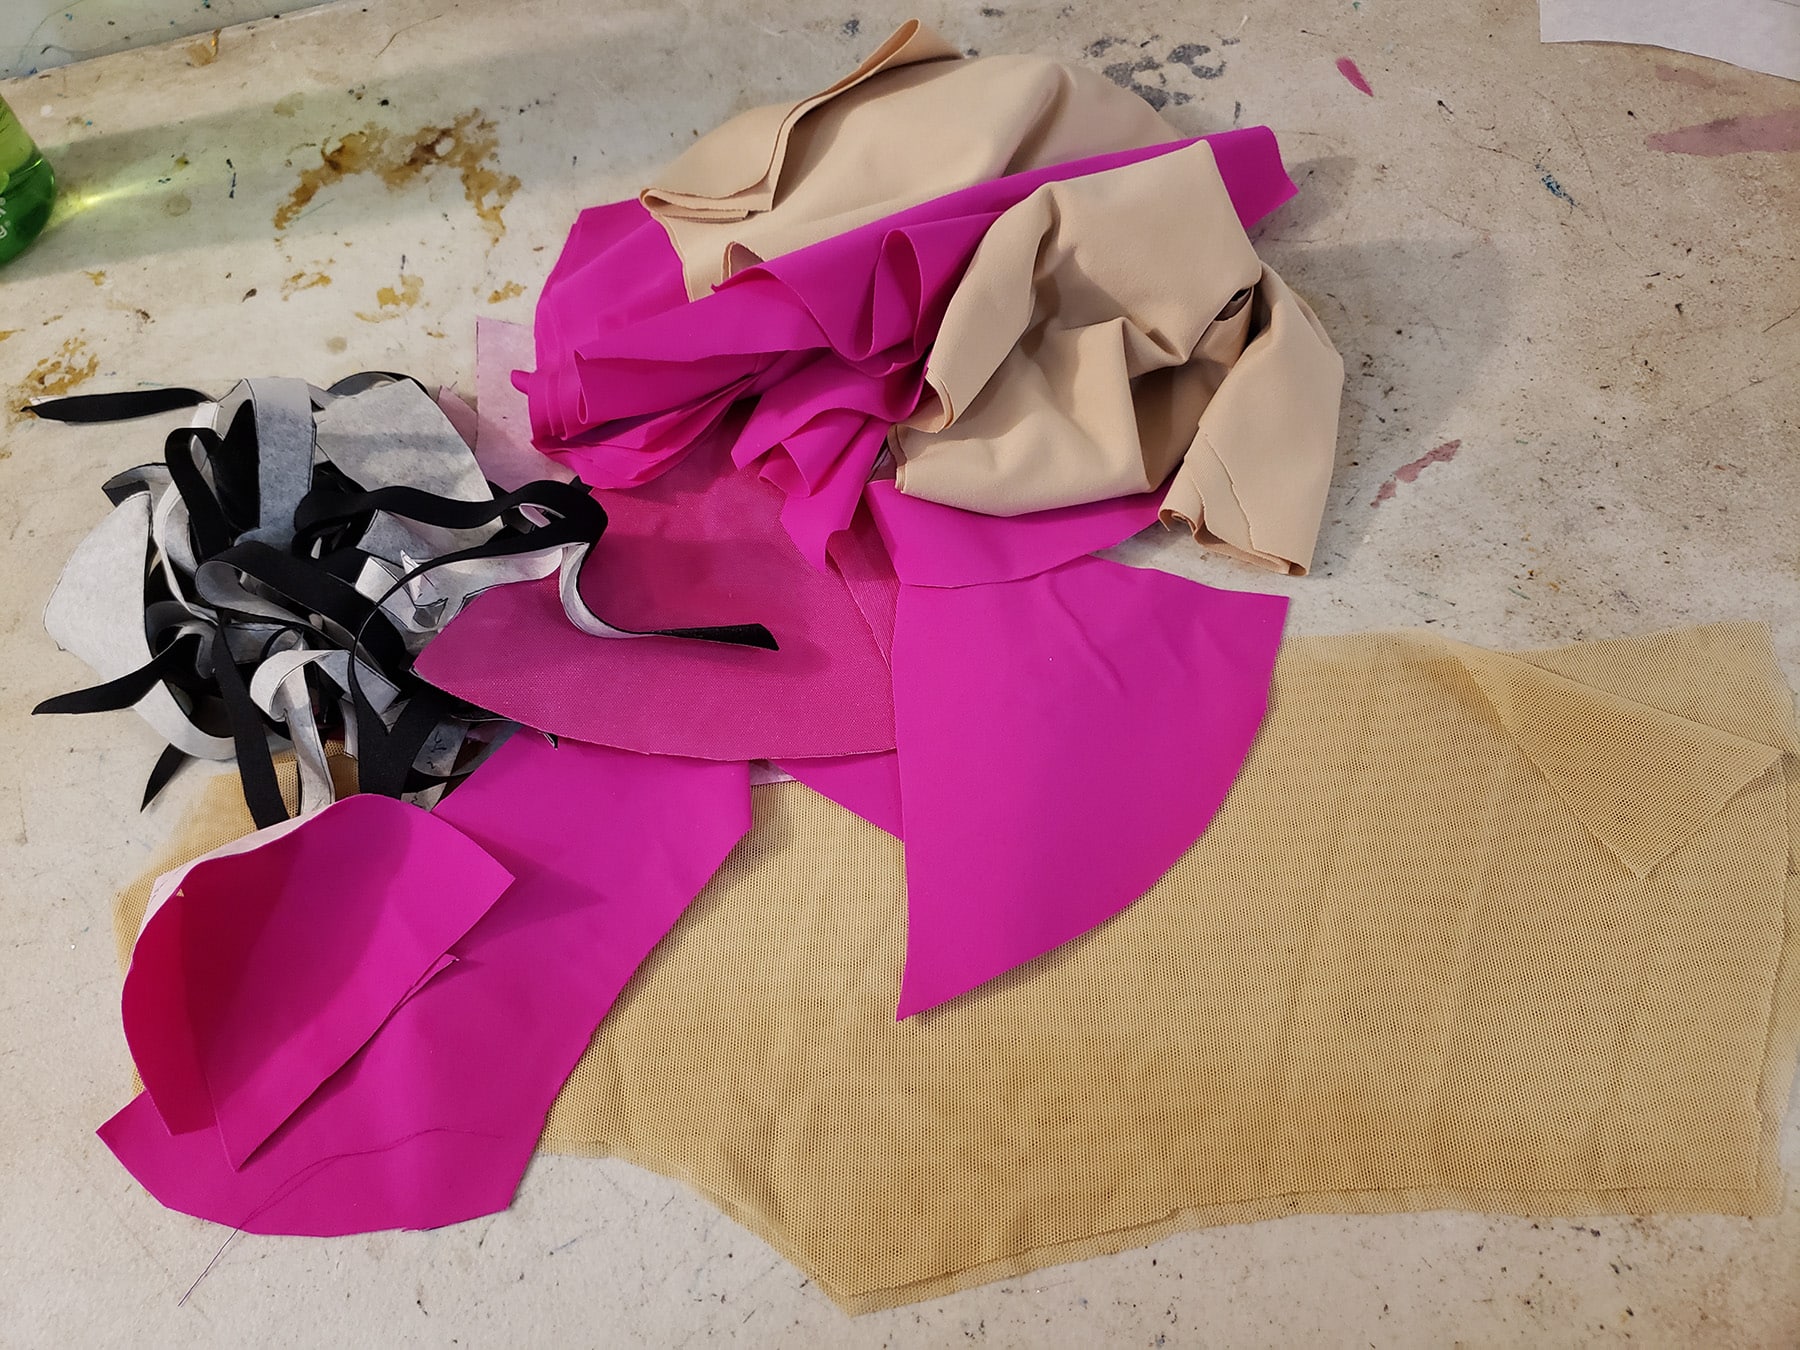 A small pile of cut fabric pieces on a work table. There are pieces of hot pink spandex, hot pink mesh, beige mesh, beige lining, and black spandex.